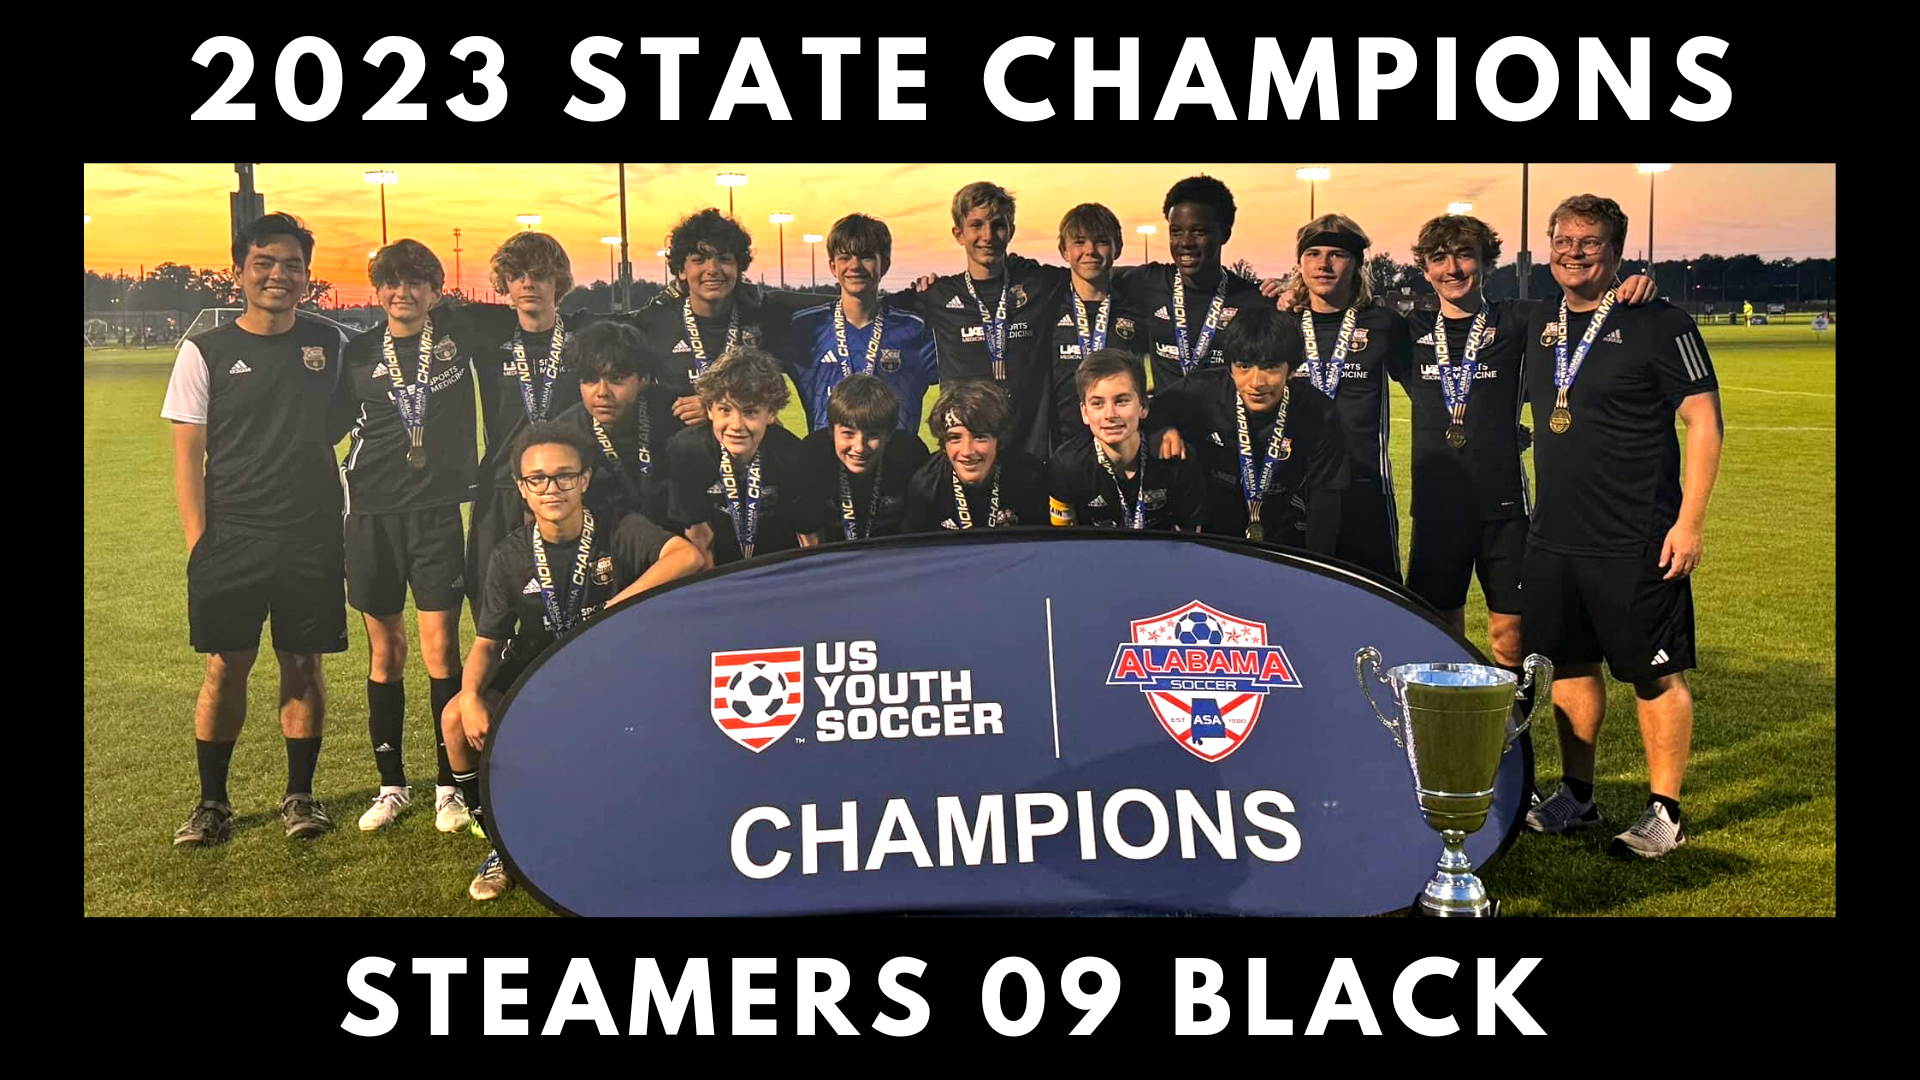 2023 Steamers 09 Black State Champions